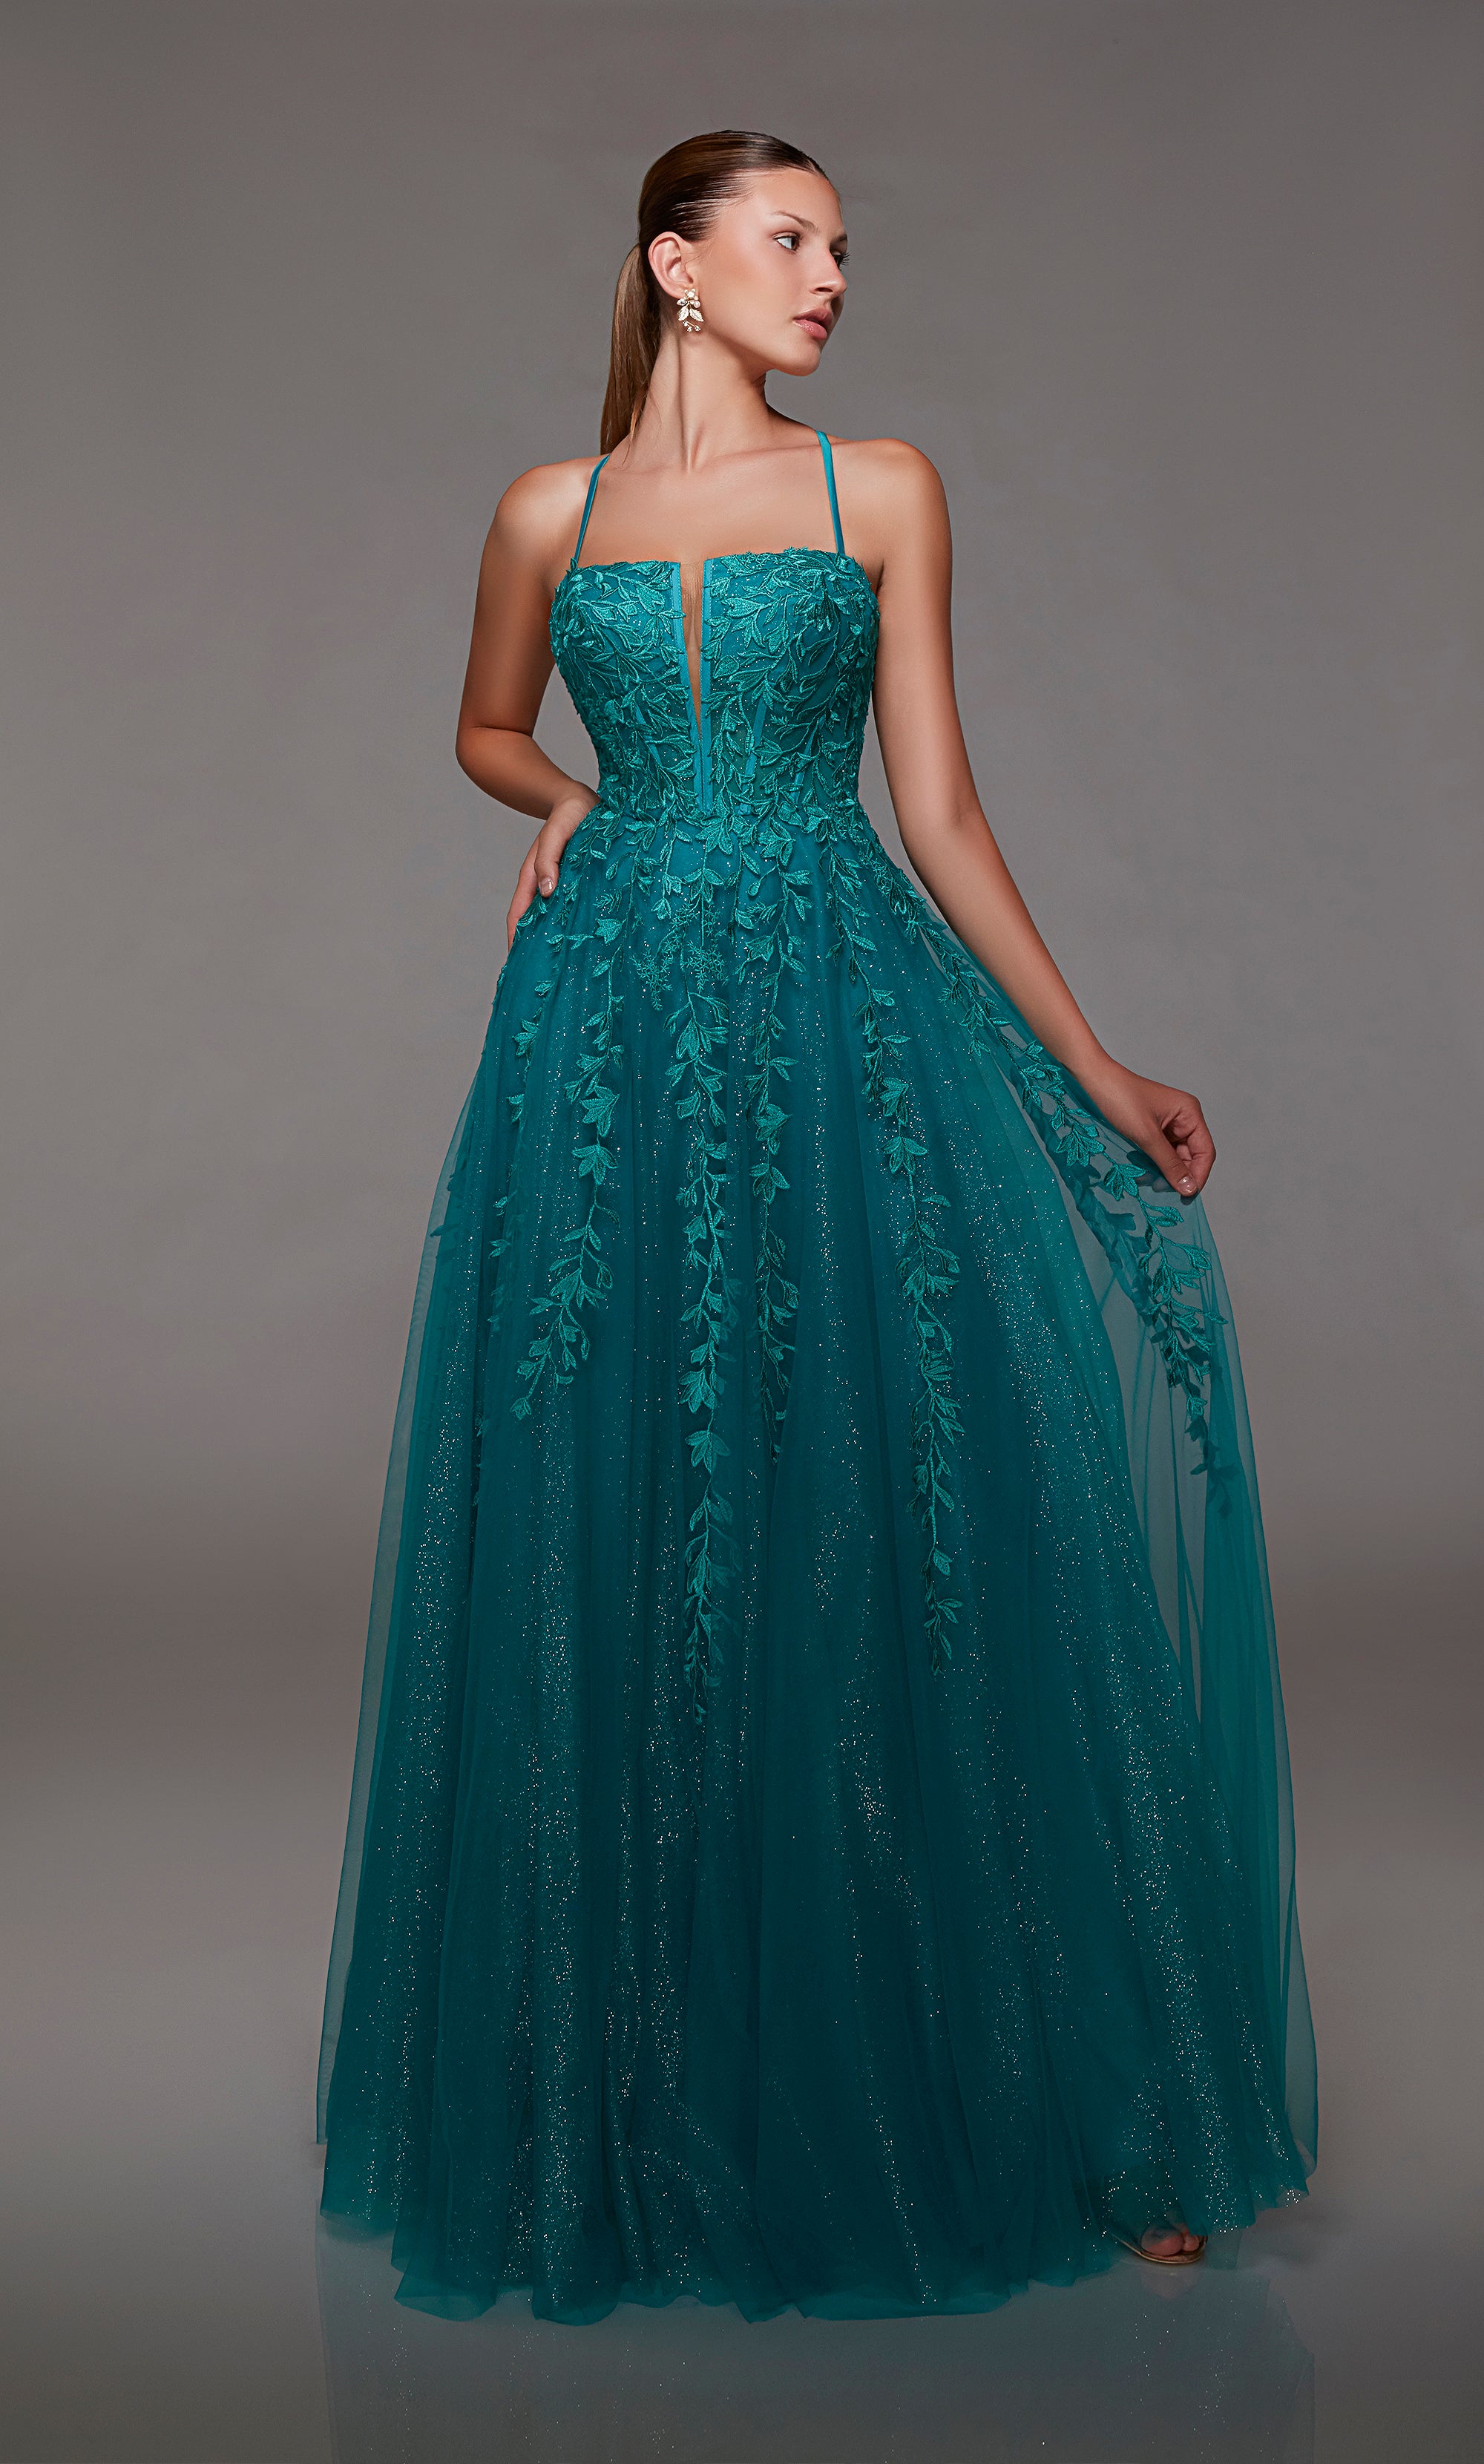 Lapis blue square neck ball gown prom dress: Glitter tulle, corset bodice, adorned with floral lace appliques, and an captivating strappy lace-up back.